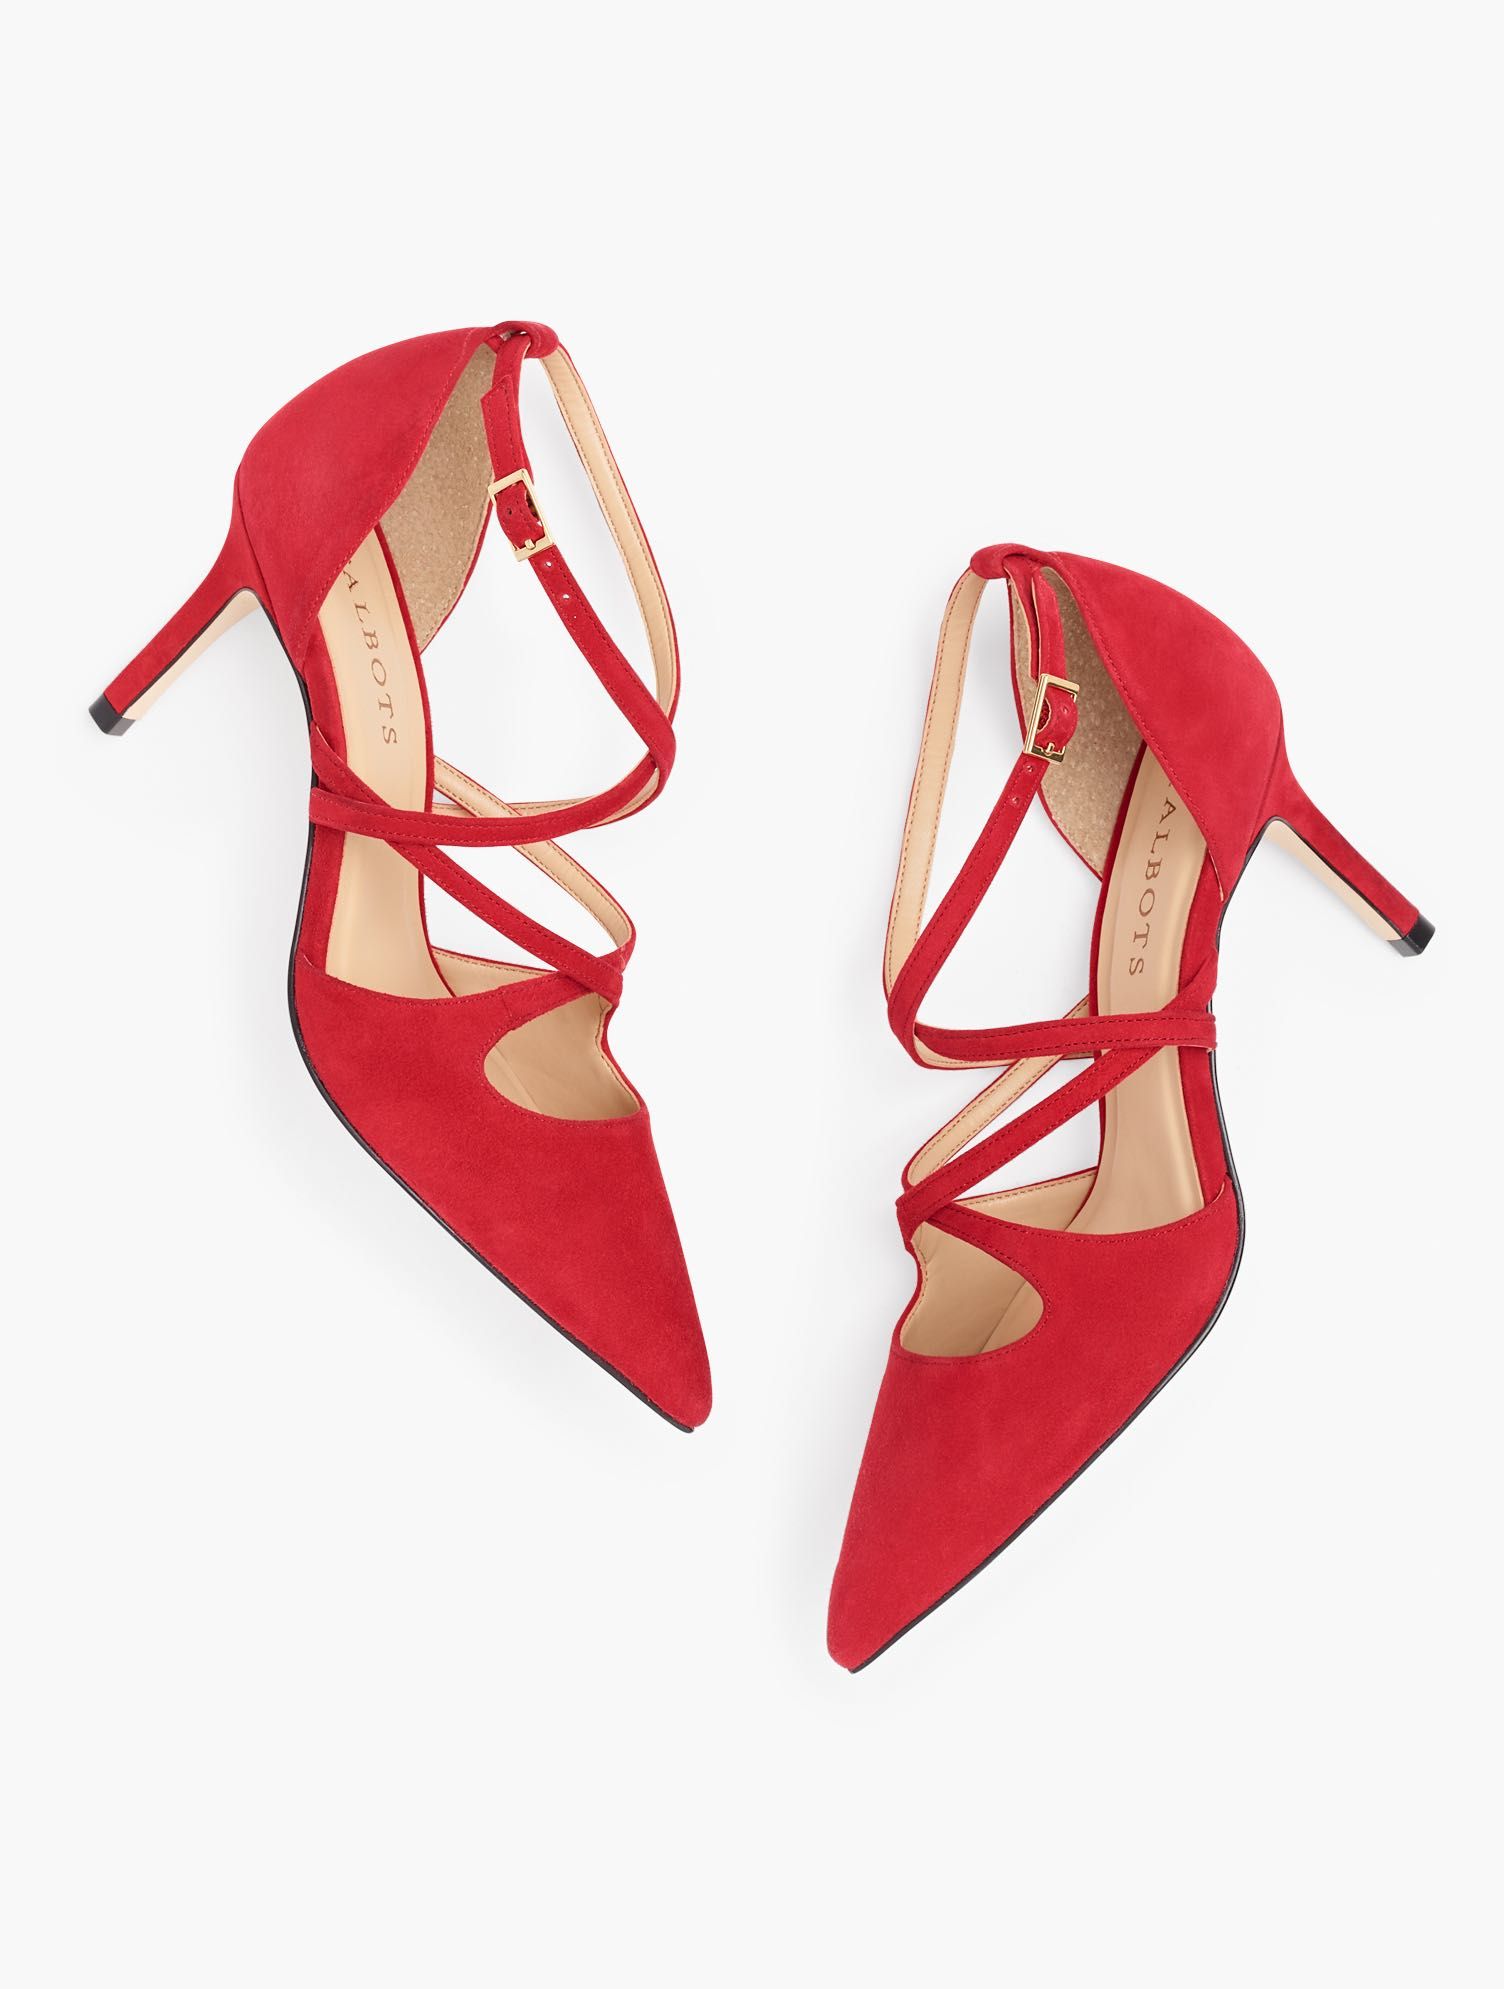 Erica Strappy Suede Pumps - Red - 5M Talbots | Haven Well Within